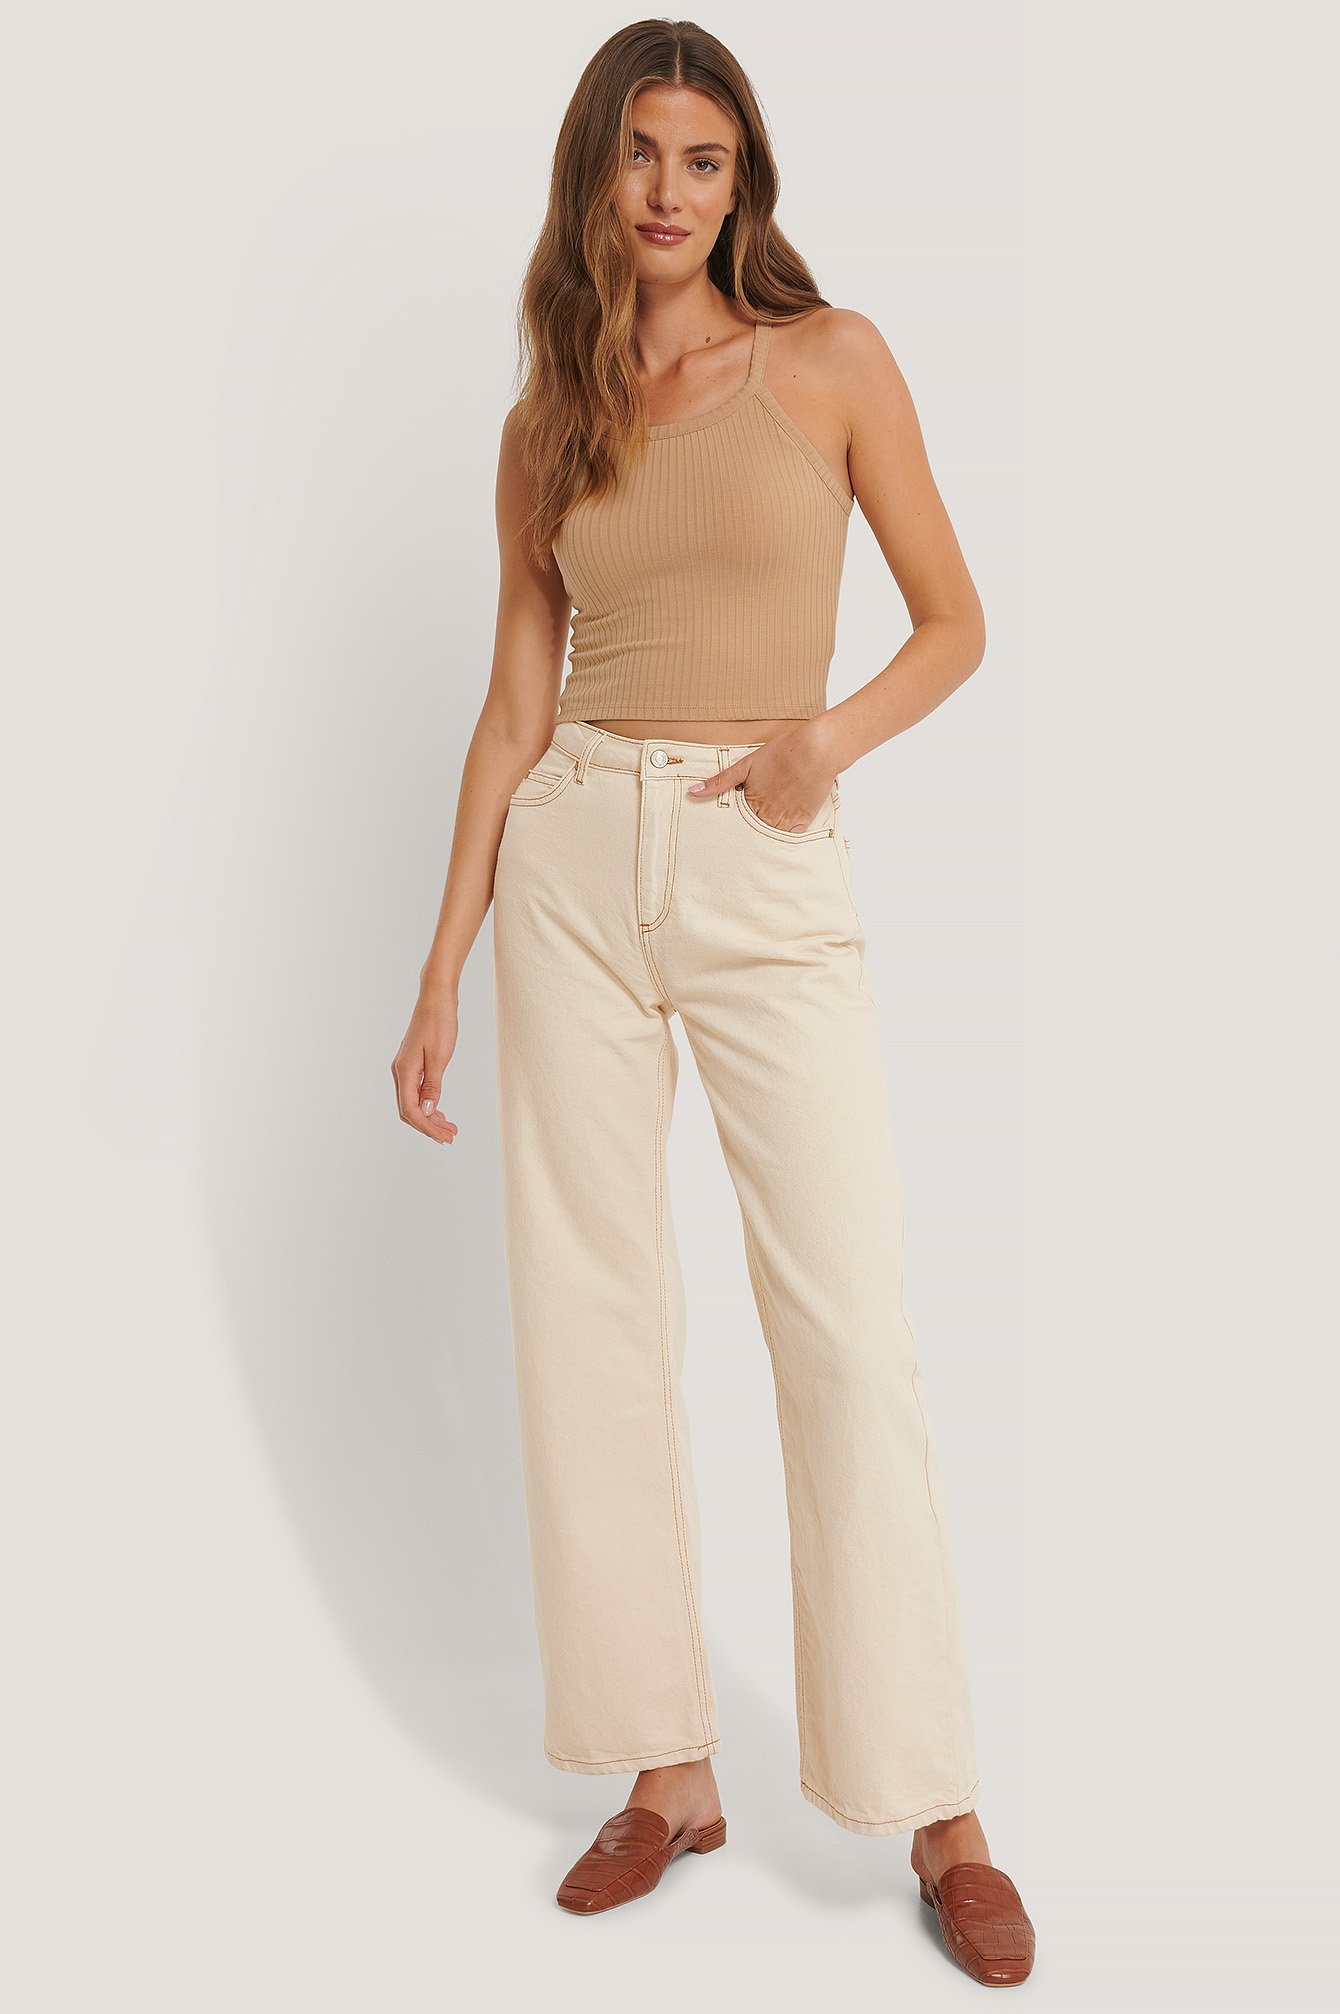 beige high waisted jeans